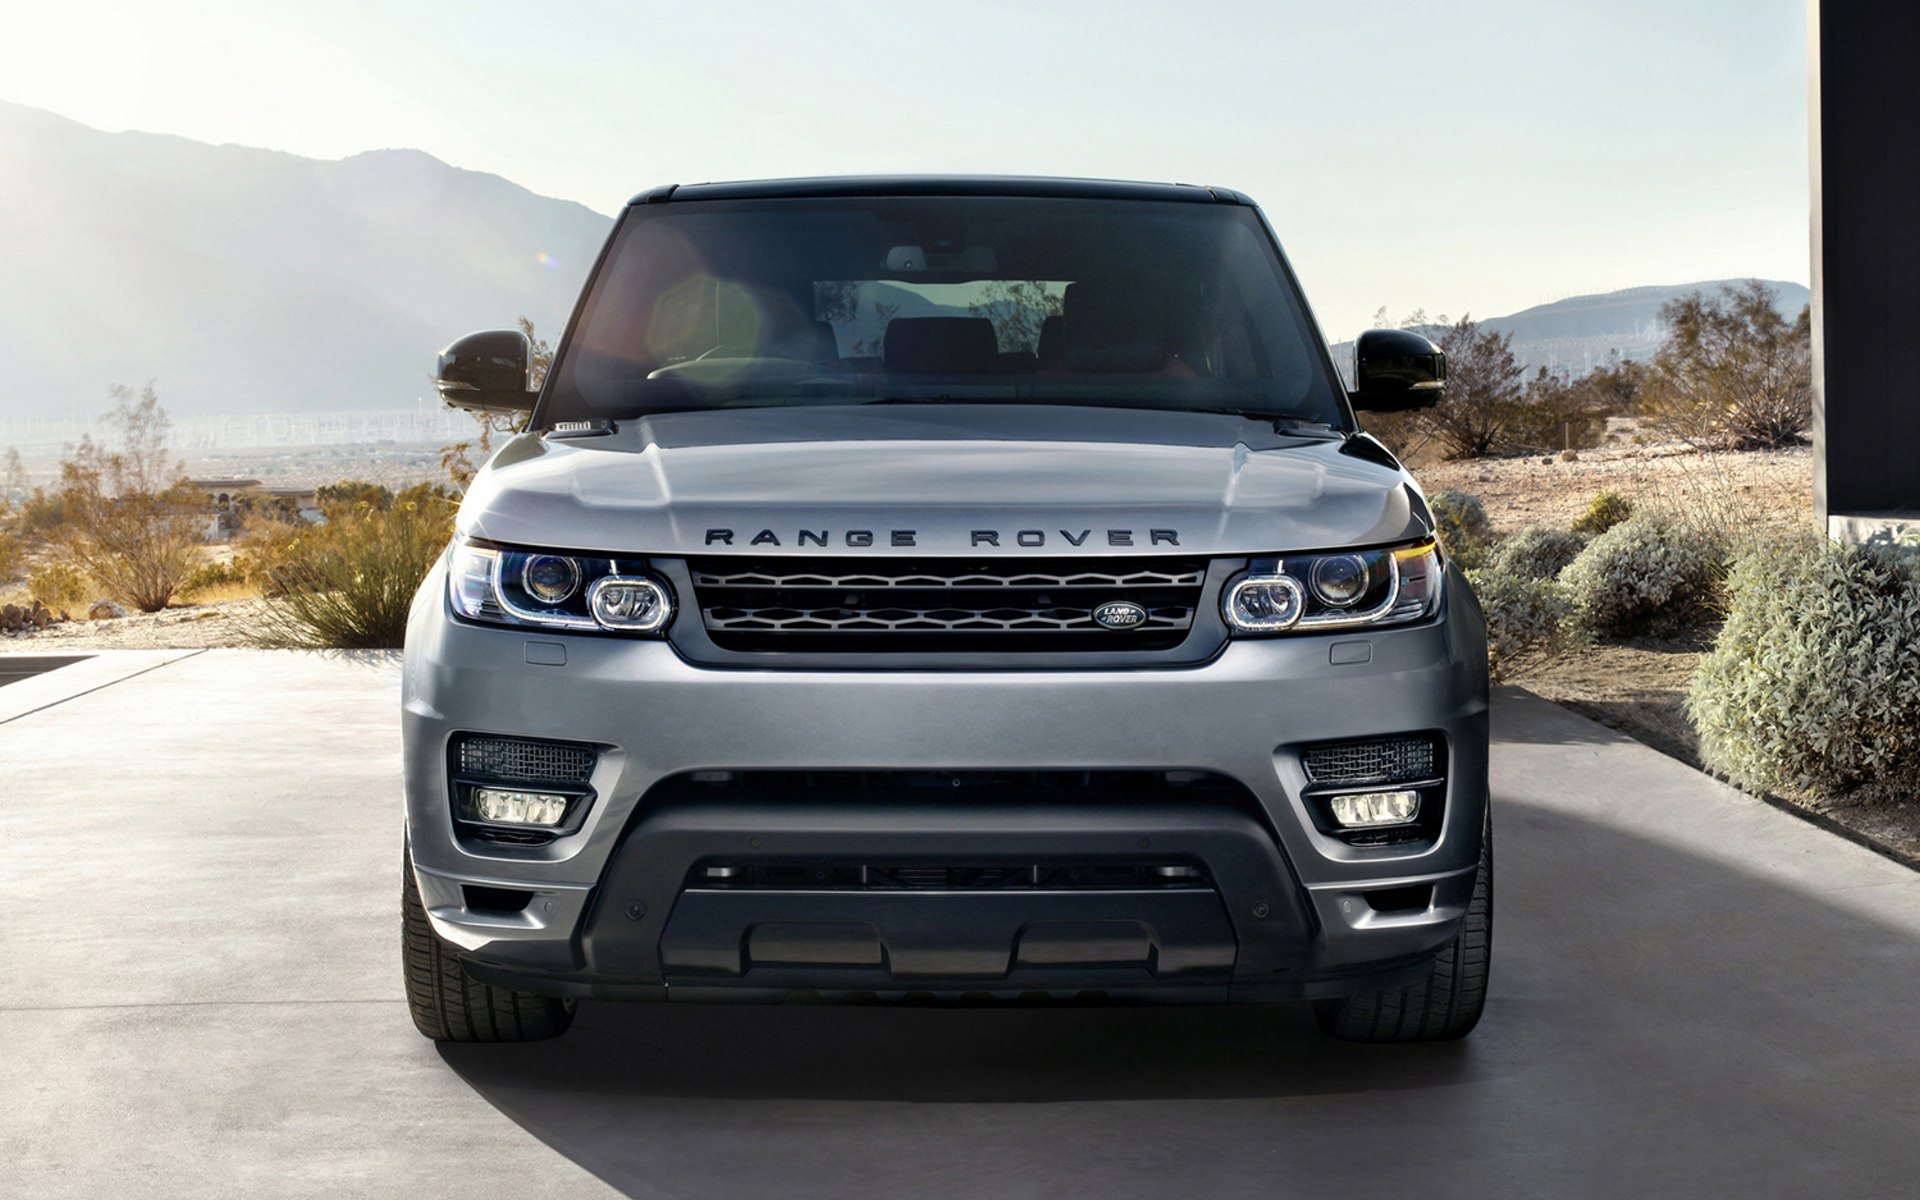 Range Rover Sport Wallpaper HD | Full HD Pictures